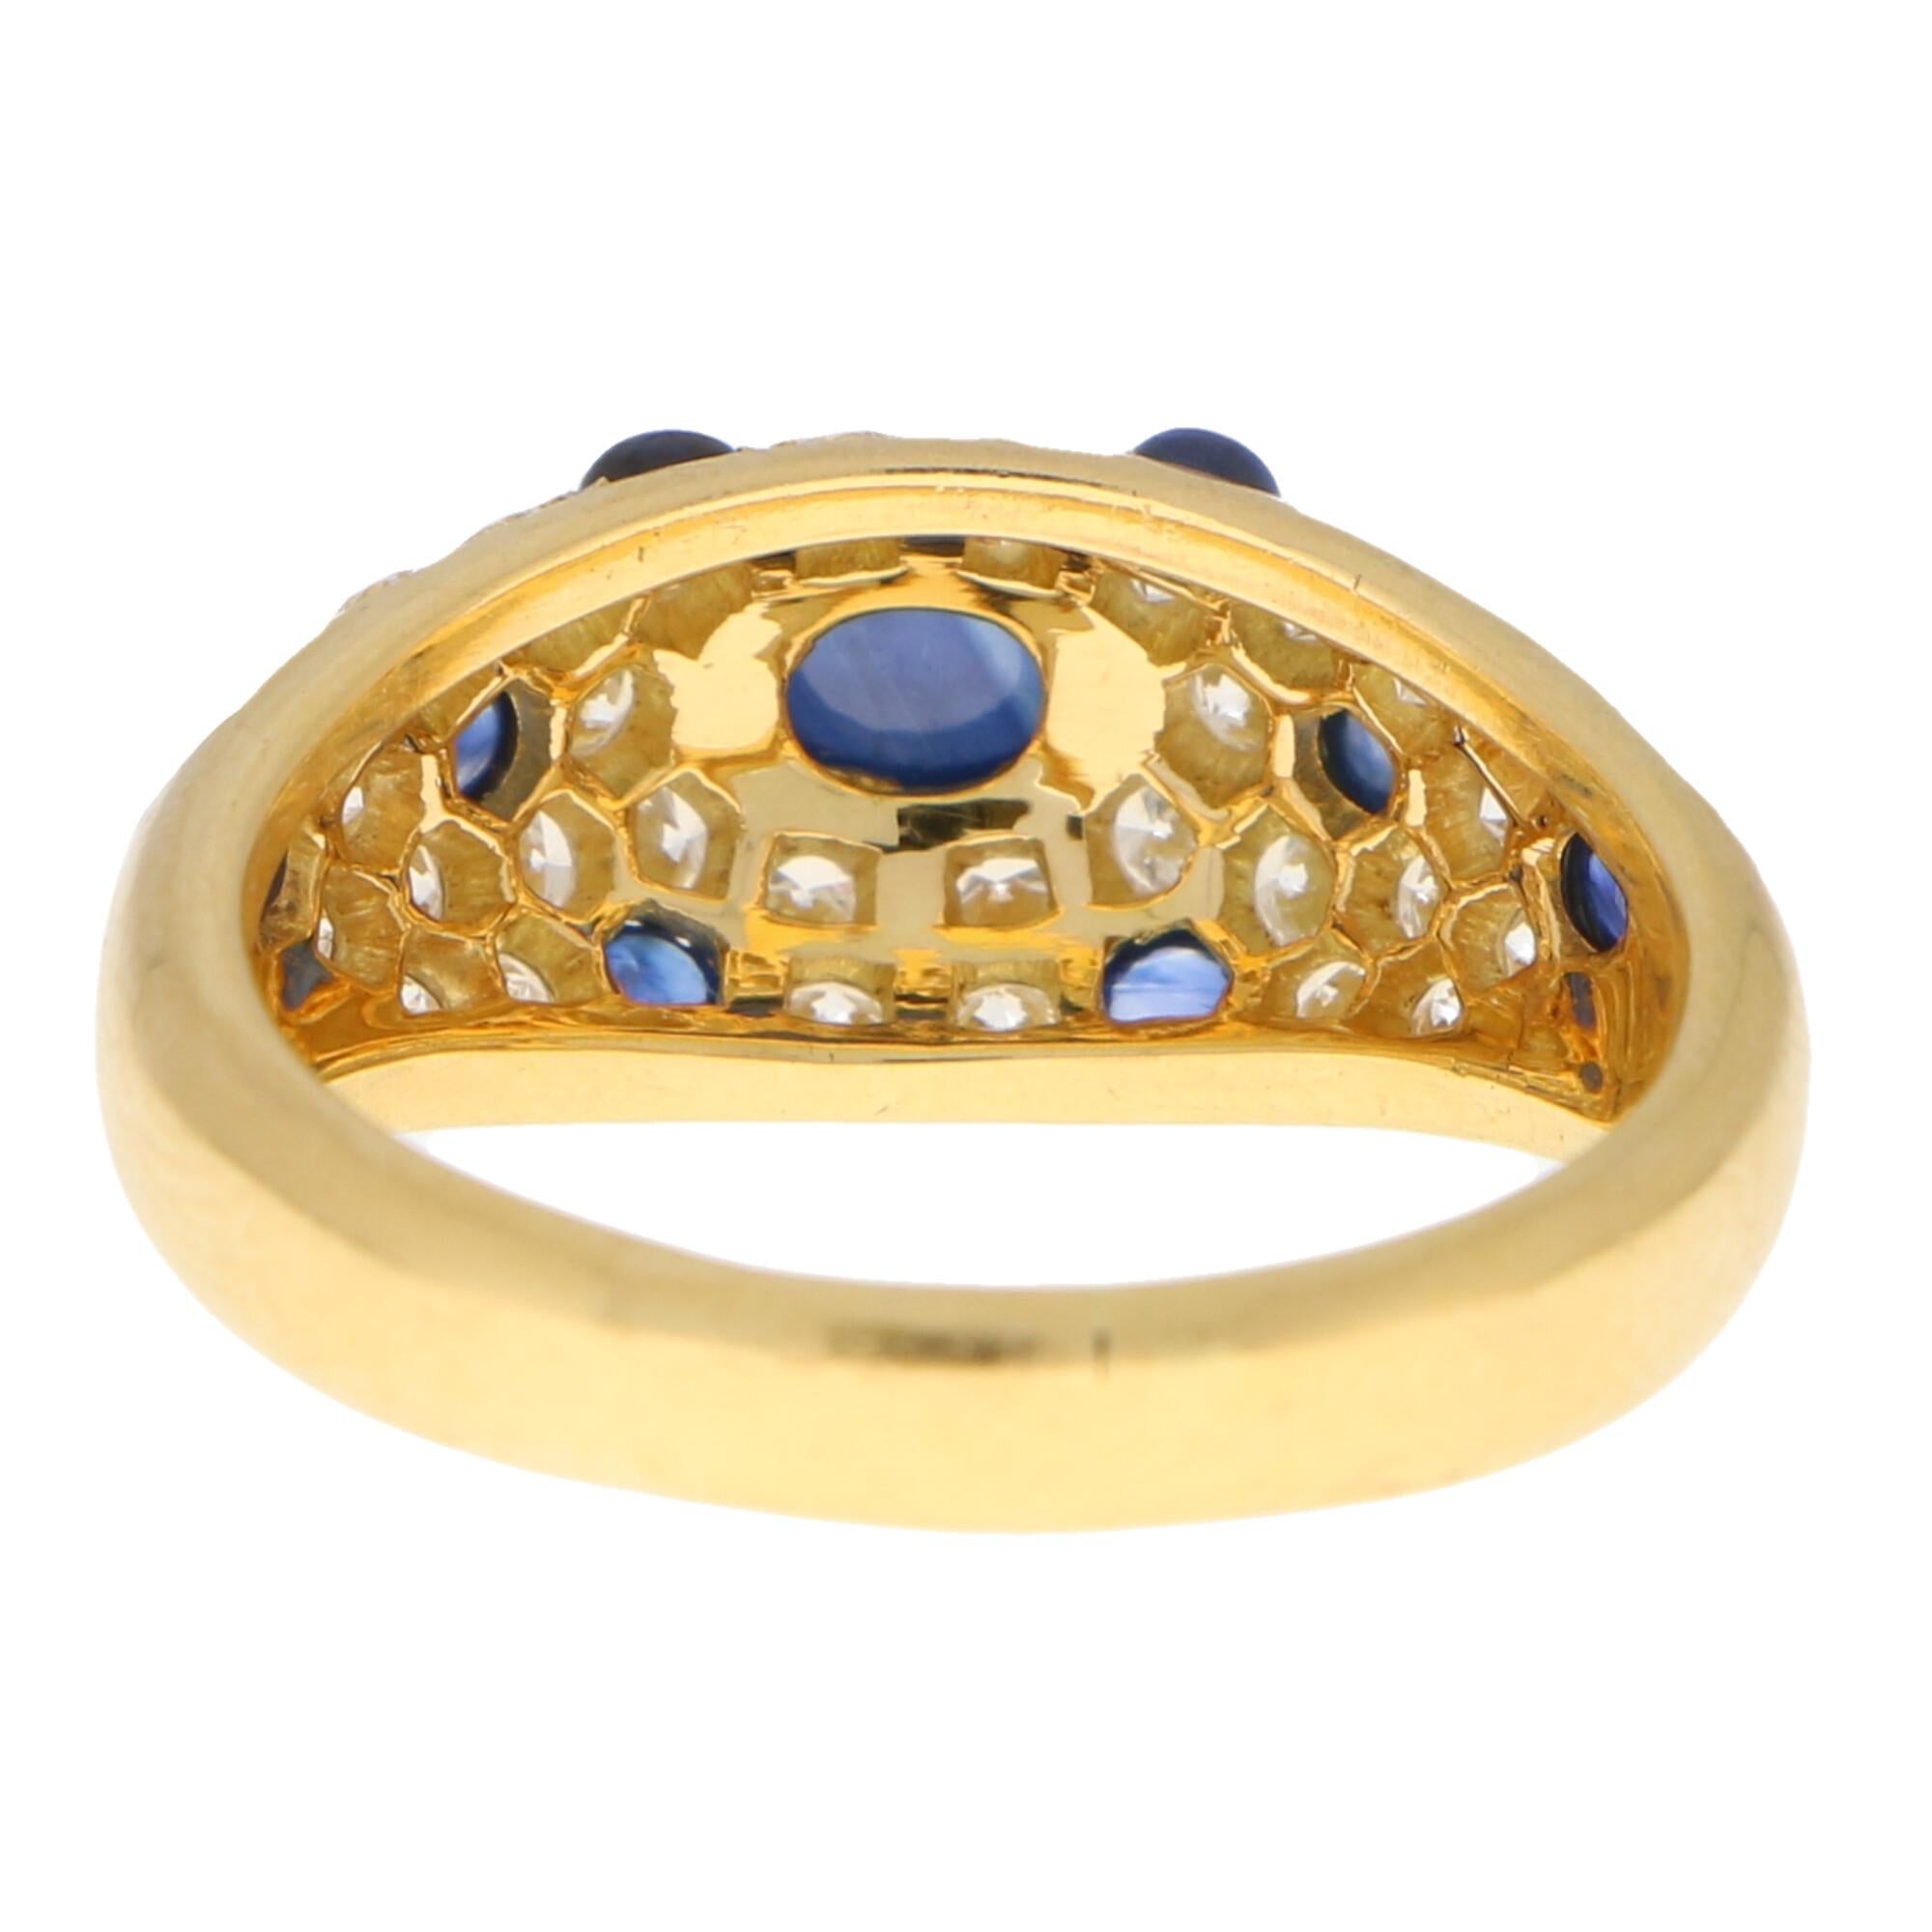 Retro Vintage Cartier Sapphire and Diamond Dome Bombe Ring Set in 18k Yellow Gold